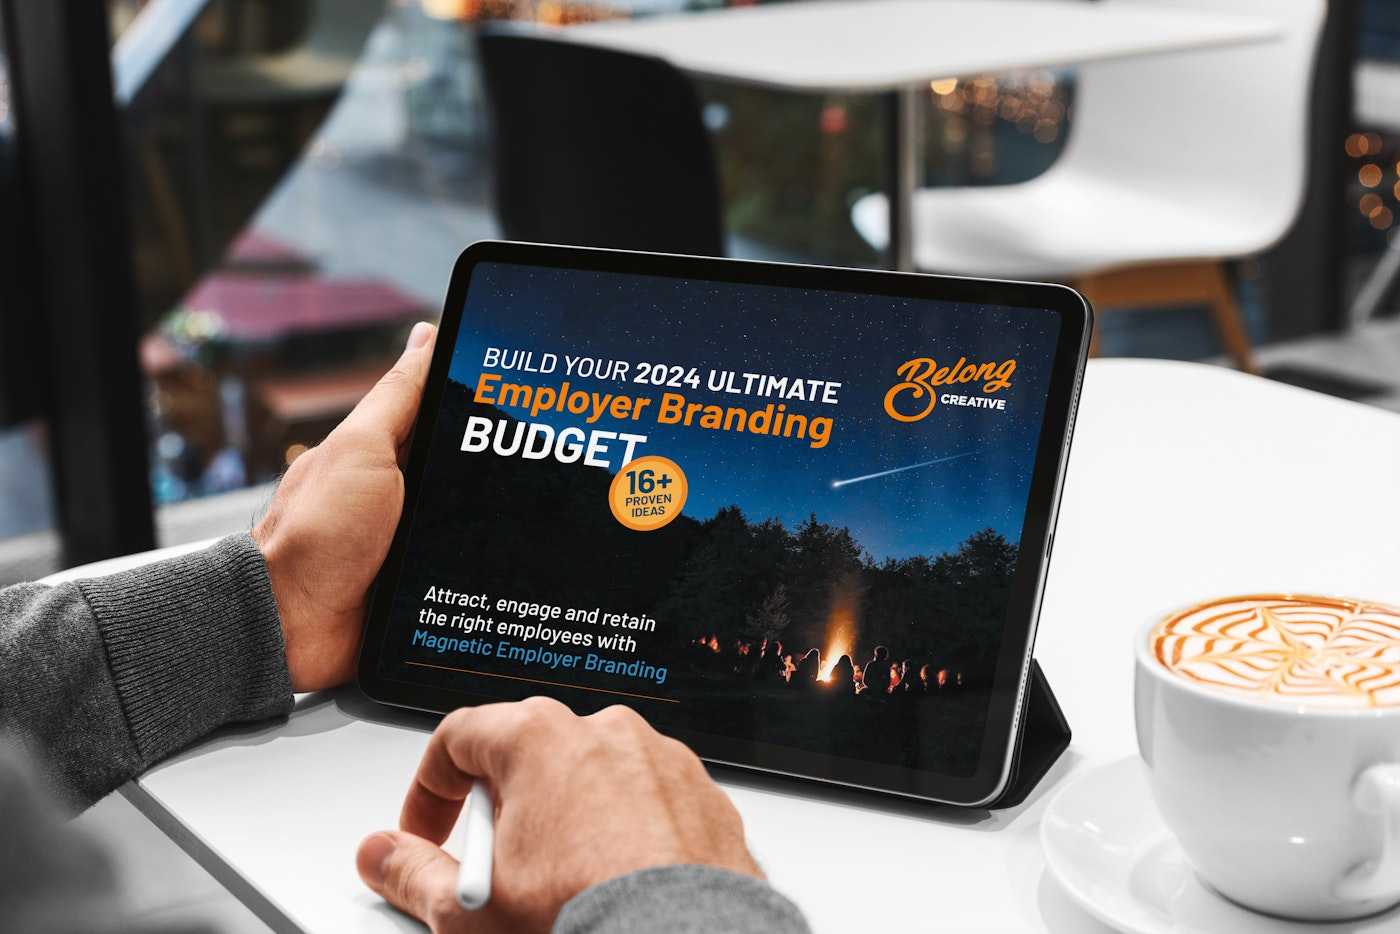 Man at Cafe looking at Employer Brand Budget ebook